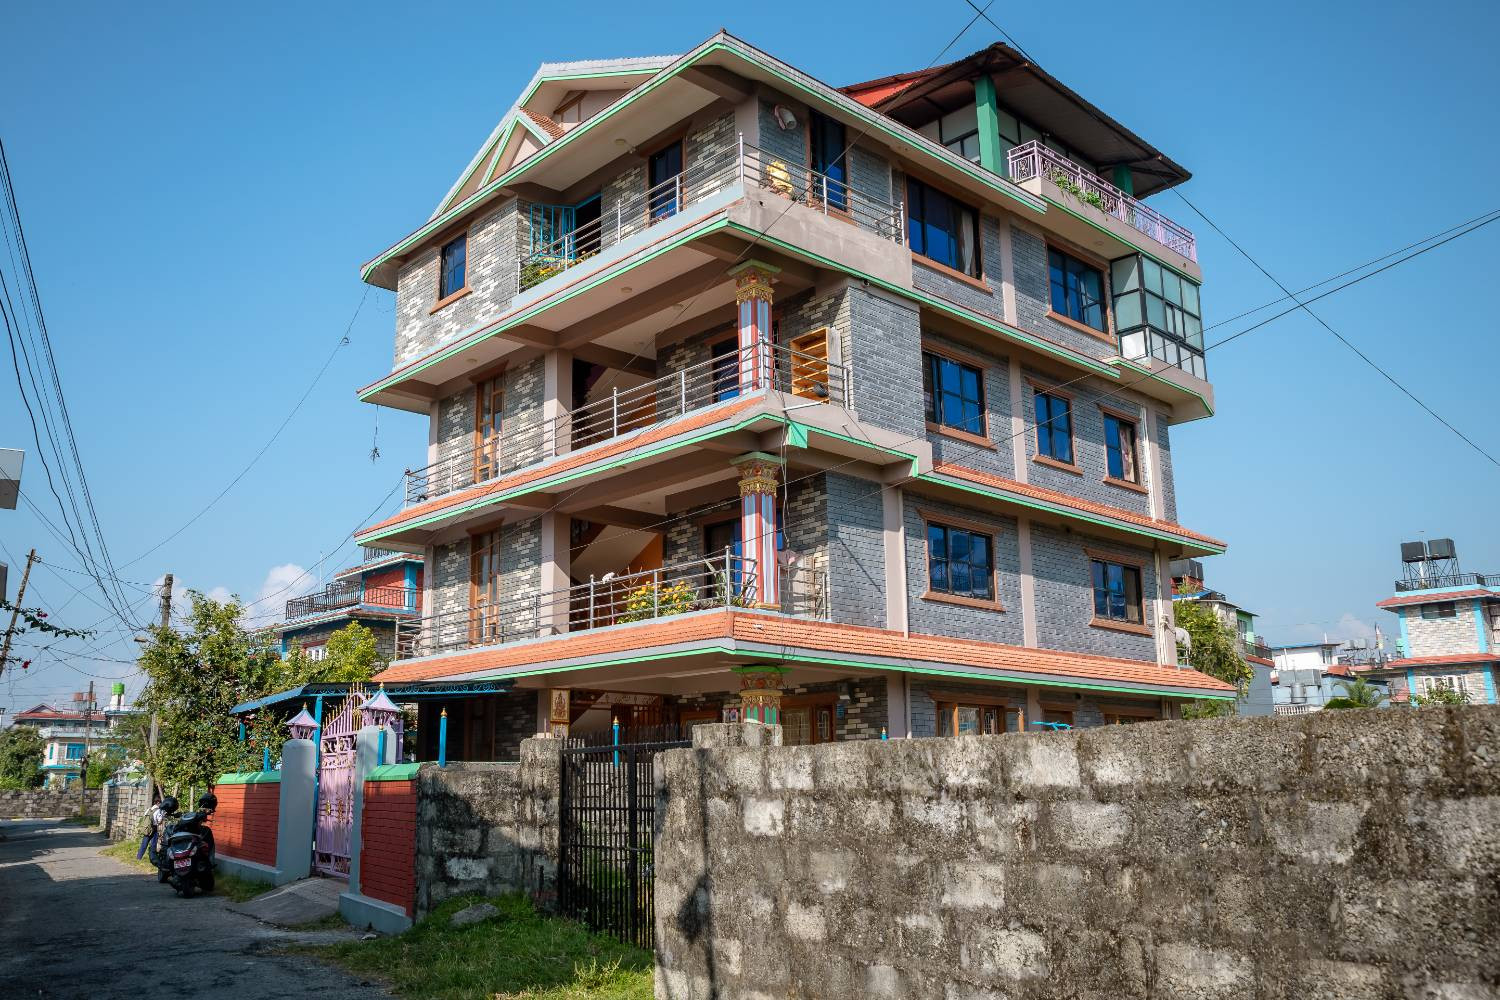 thumbnail of RESIDENTIAL HOUSE  ON SALE AT POKHARA-12  LALIGURAS  WITH SERENE MOUNTAIN VIEW